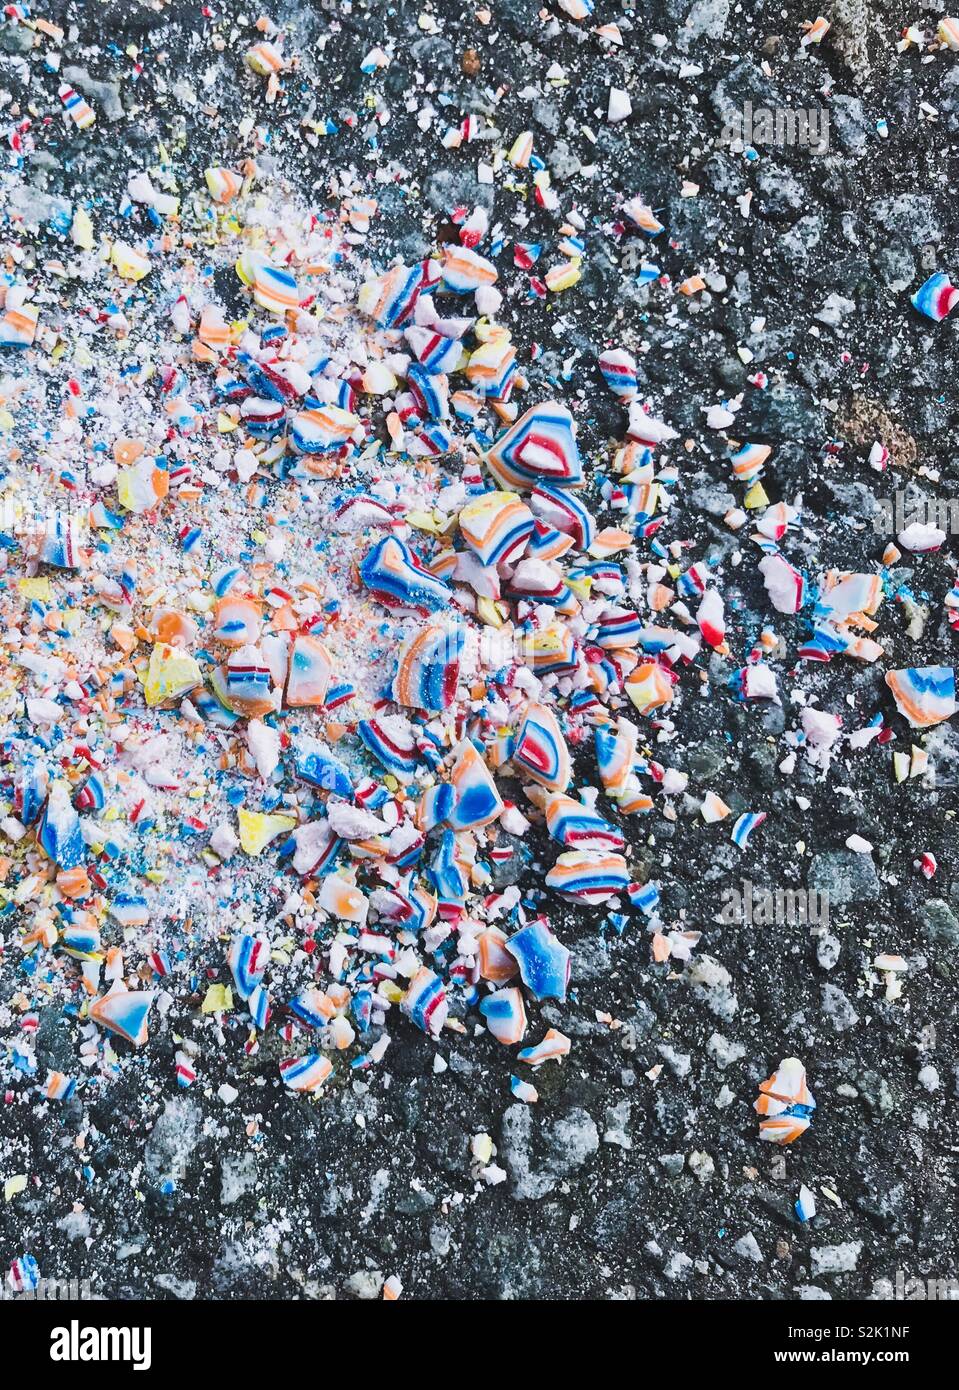 Colorful crushed jawbreaker candy on pavement Stock Photo